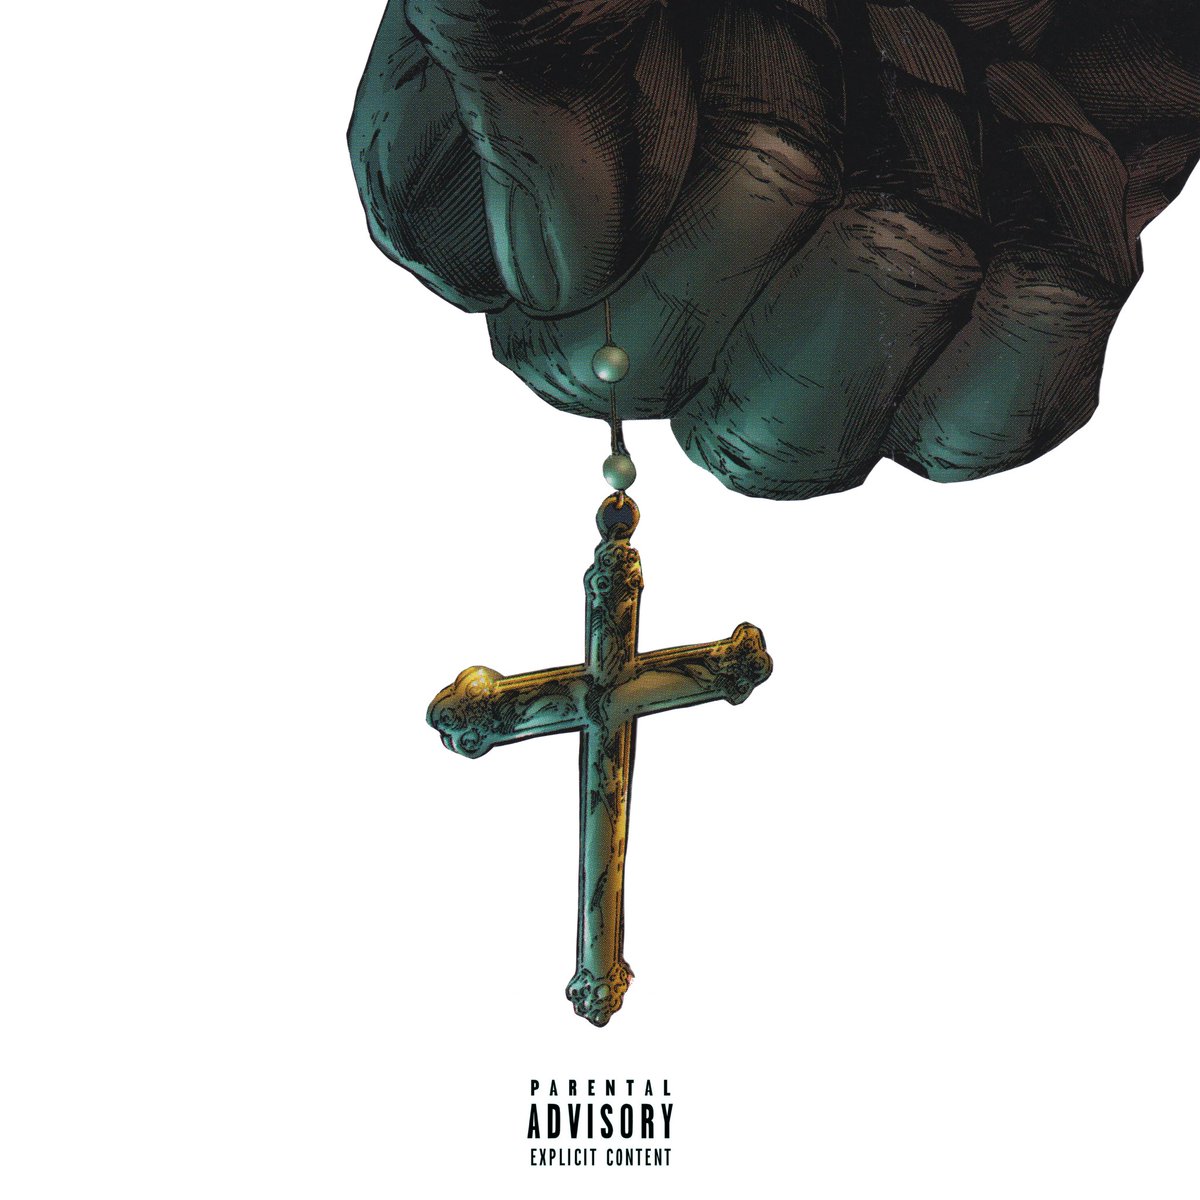 .@elcaminosway & @IamSpesh deliver their new EP ‘Martyrs Prayer II’